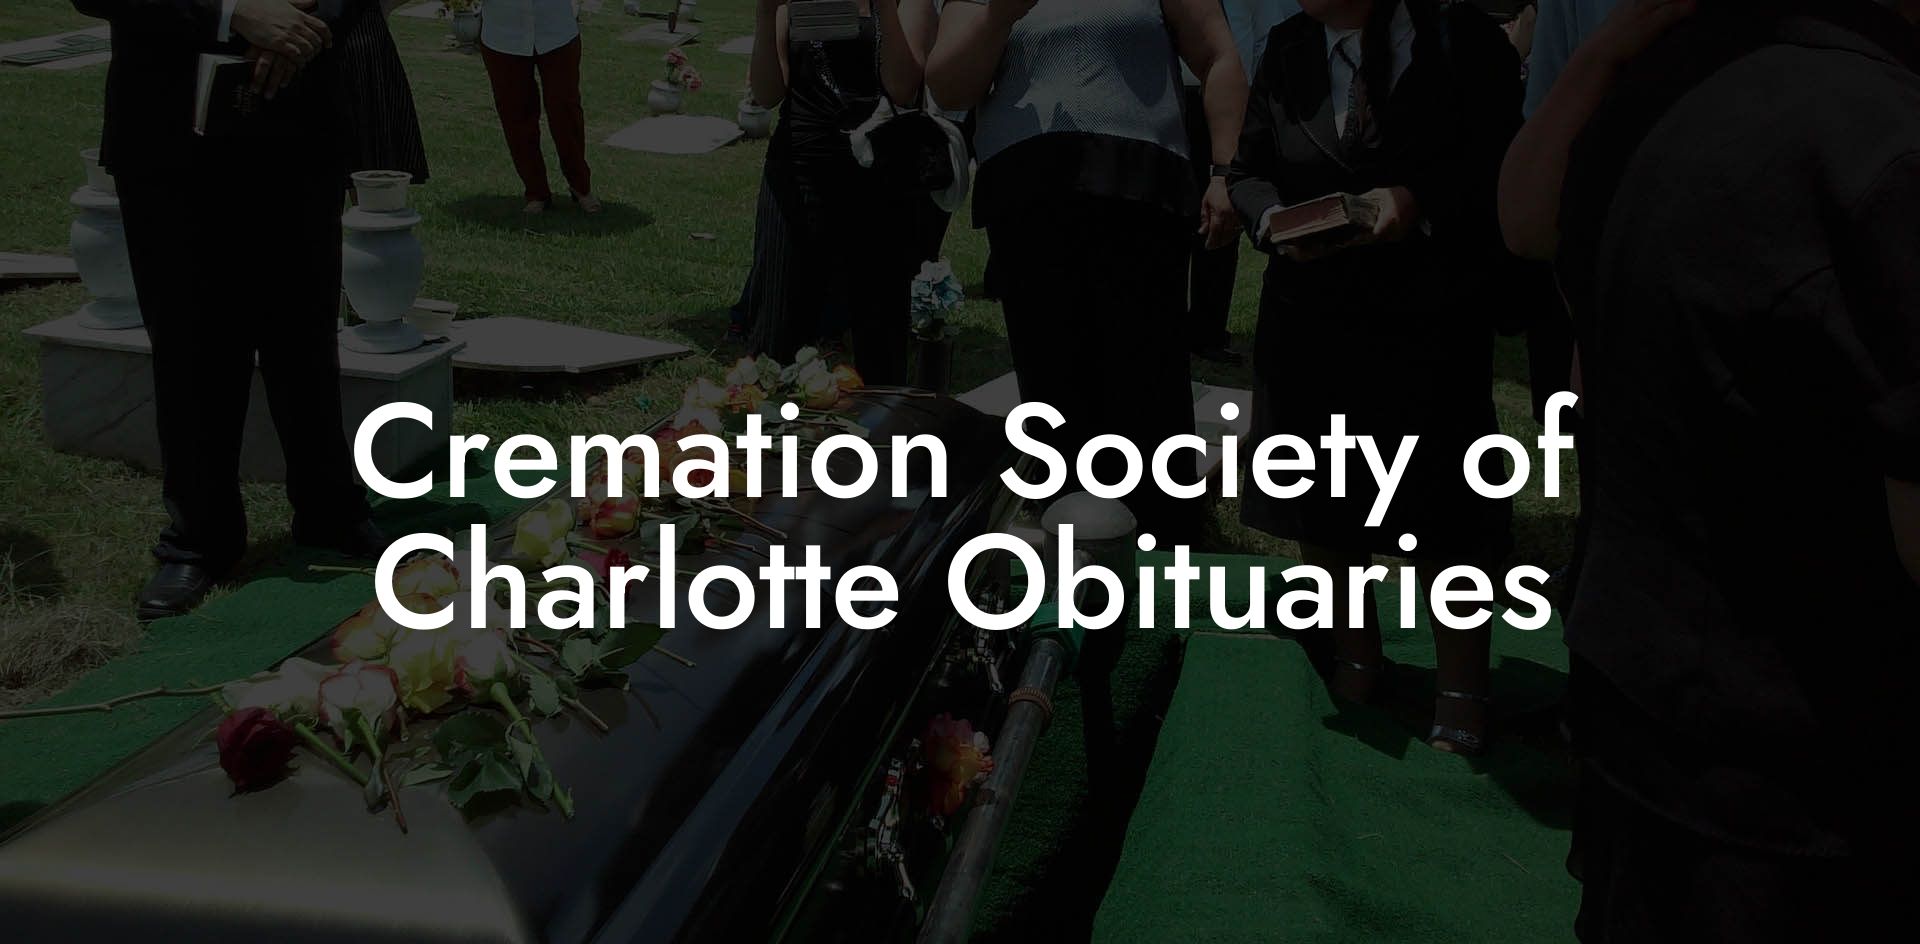 Cremation Society of Charlotte Obituaries